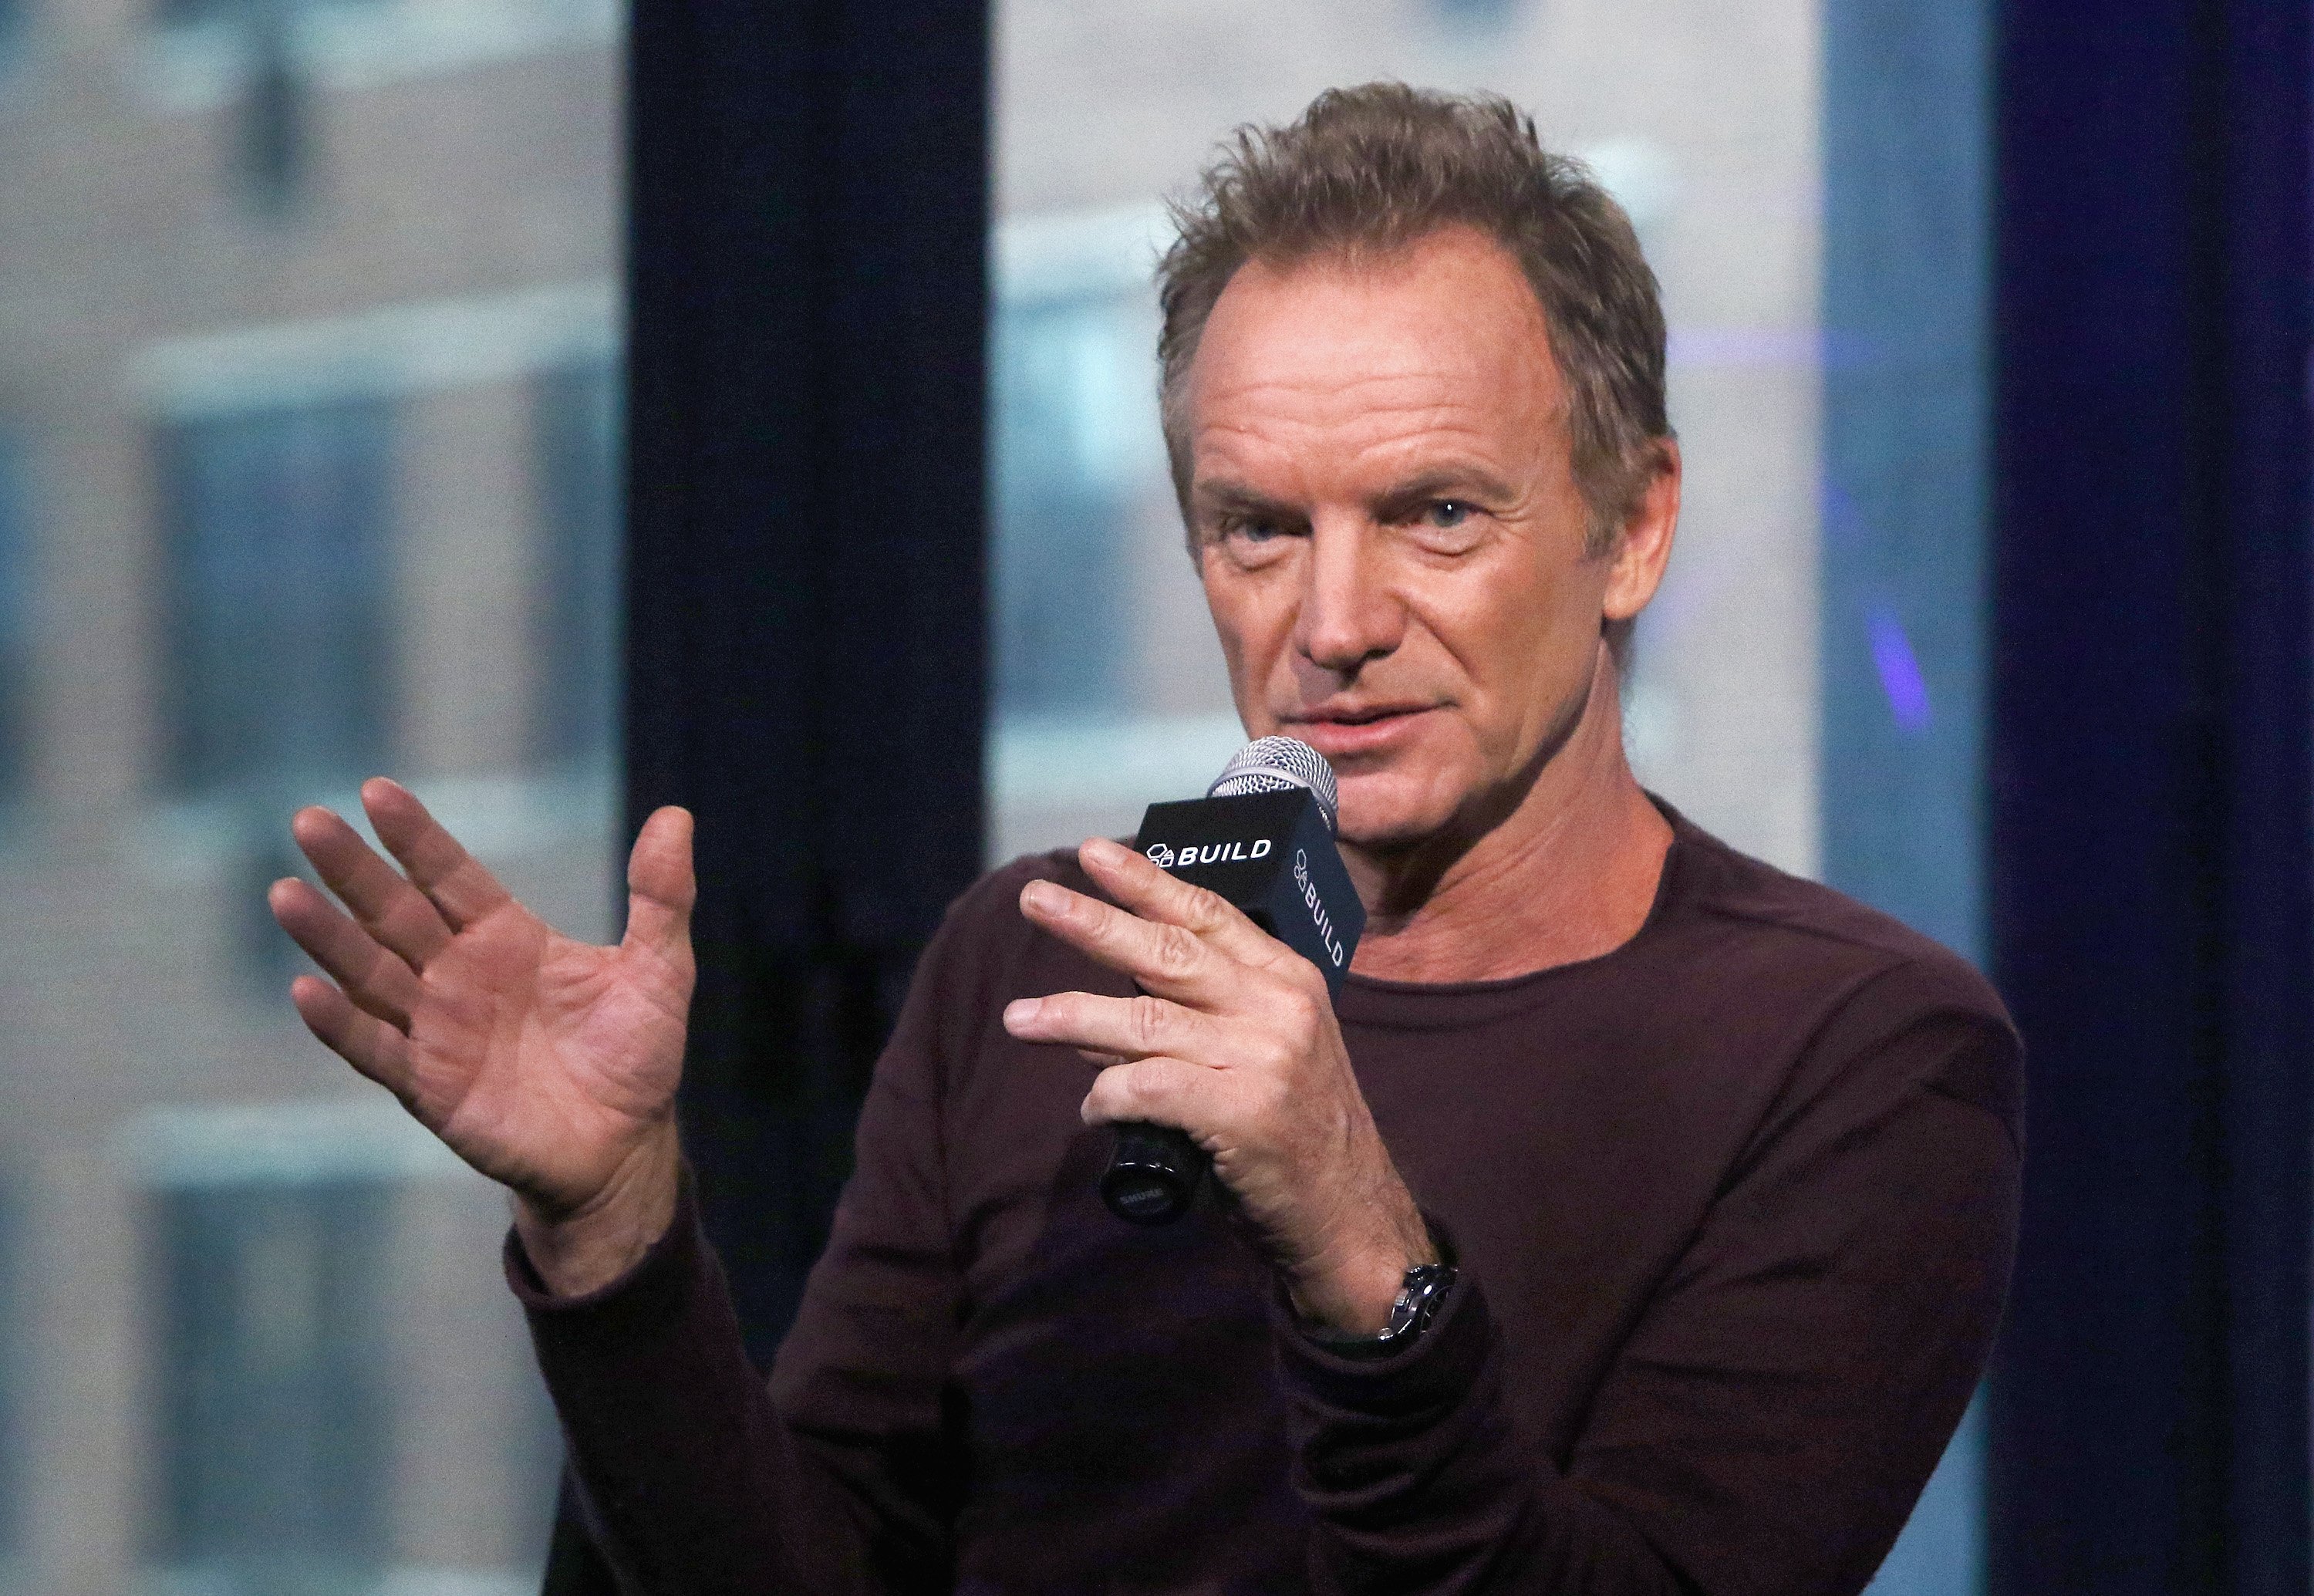 Singer/songwriter Sting speaking at an event in 2016